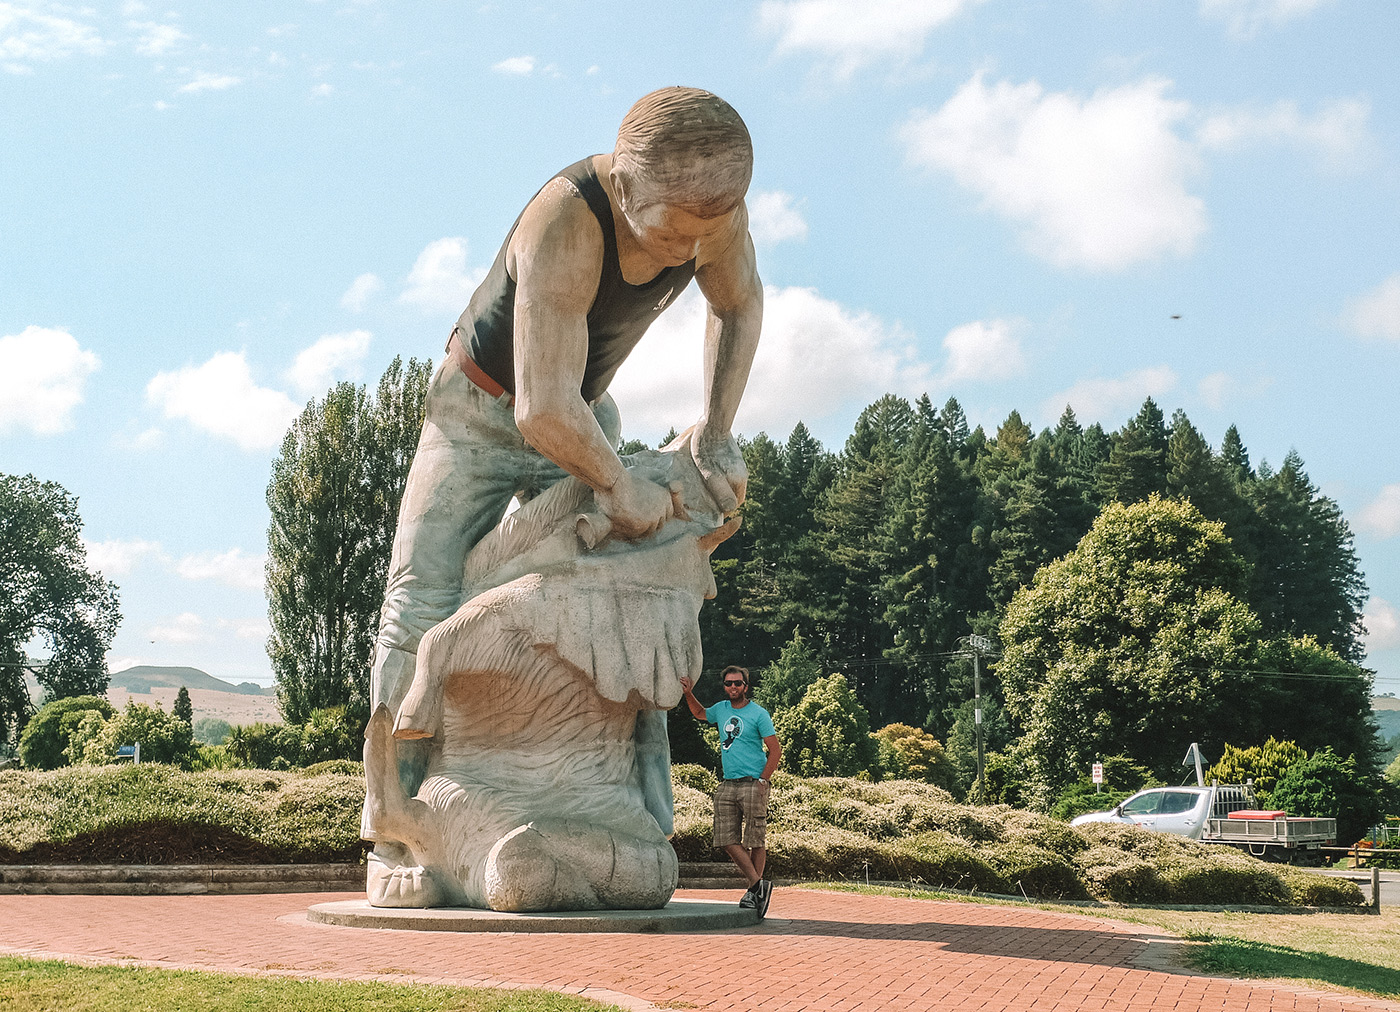 ‘Big Things’ in New Zealand - the weird and wonderful statues